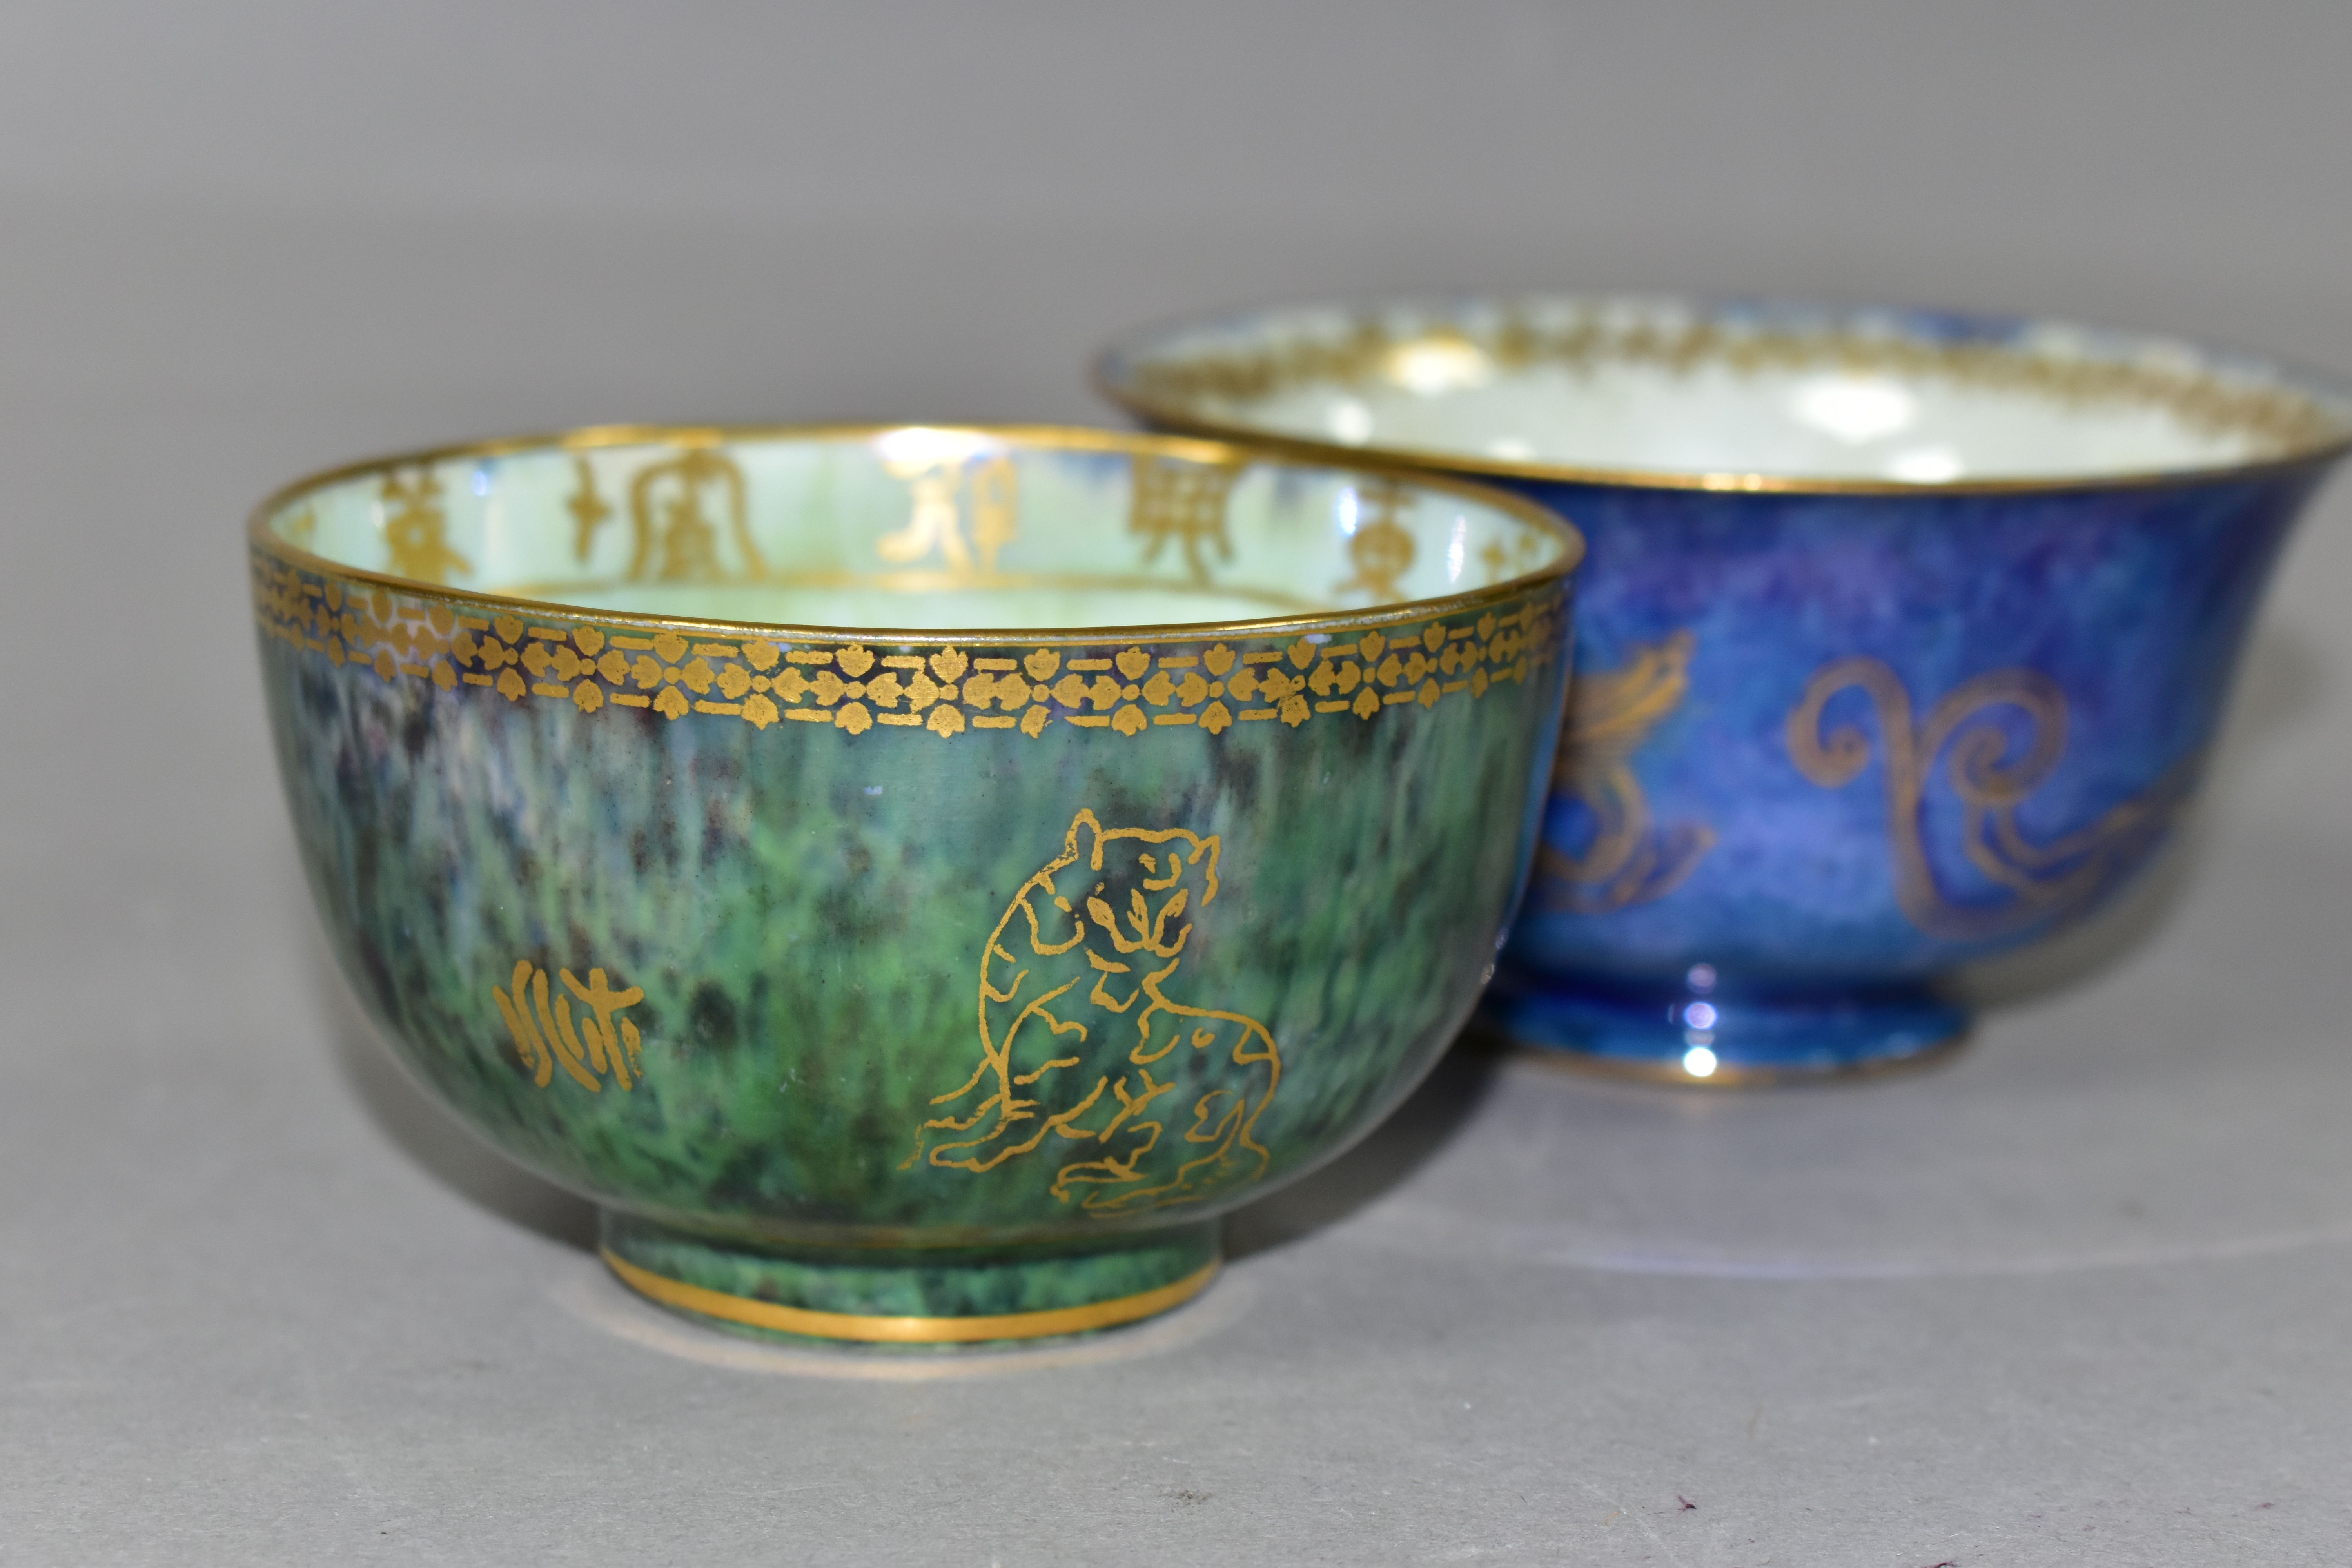 TWO WEDGWOOD BONE CHINA LUSTRE BOWLS, comprising a bowl with a blue mottled lustre exterior with a - Image 2 of 7